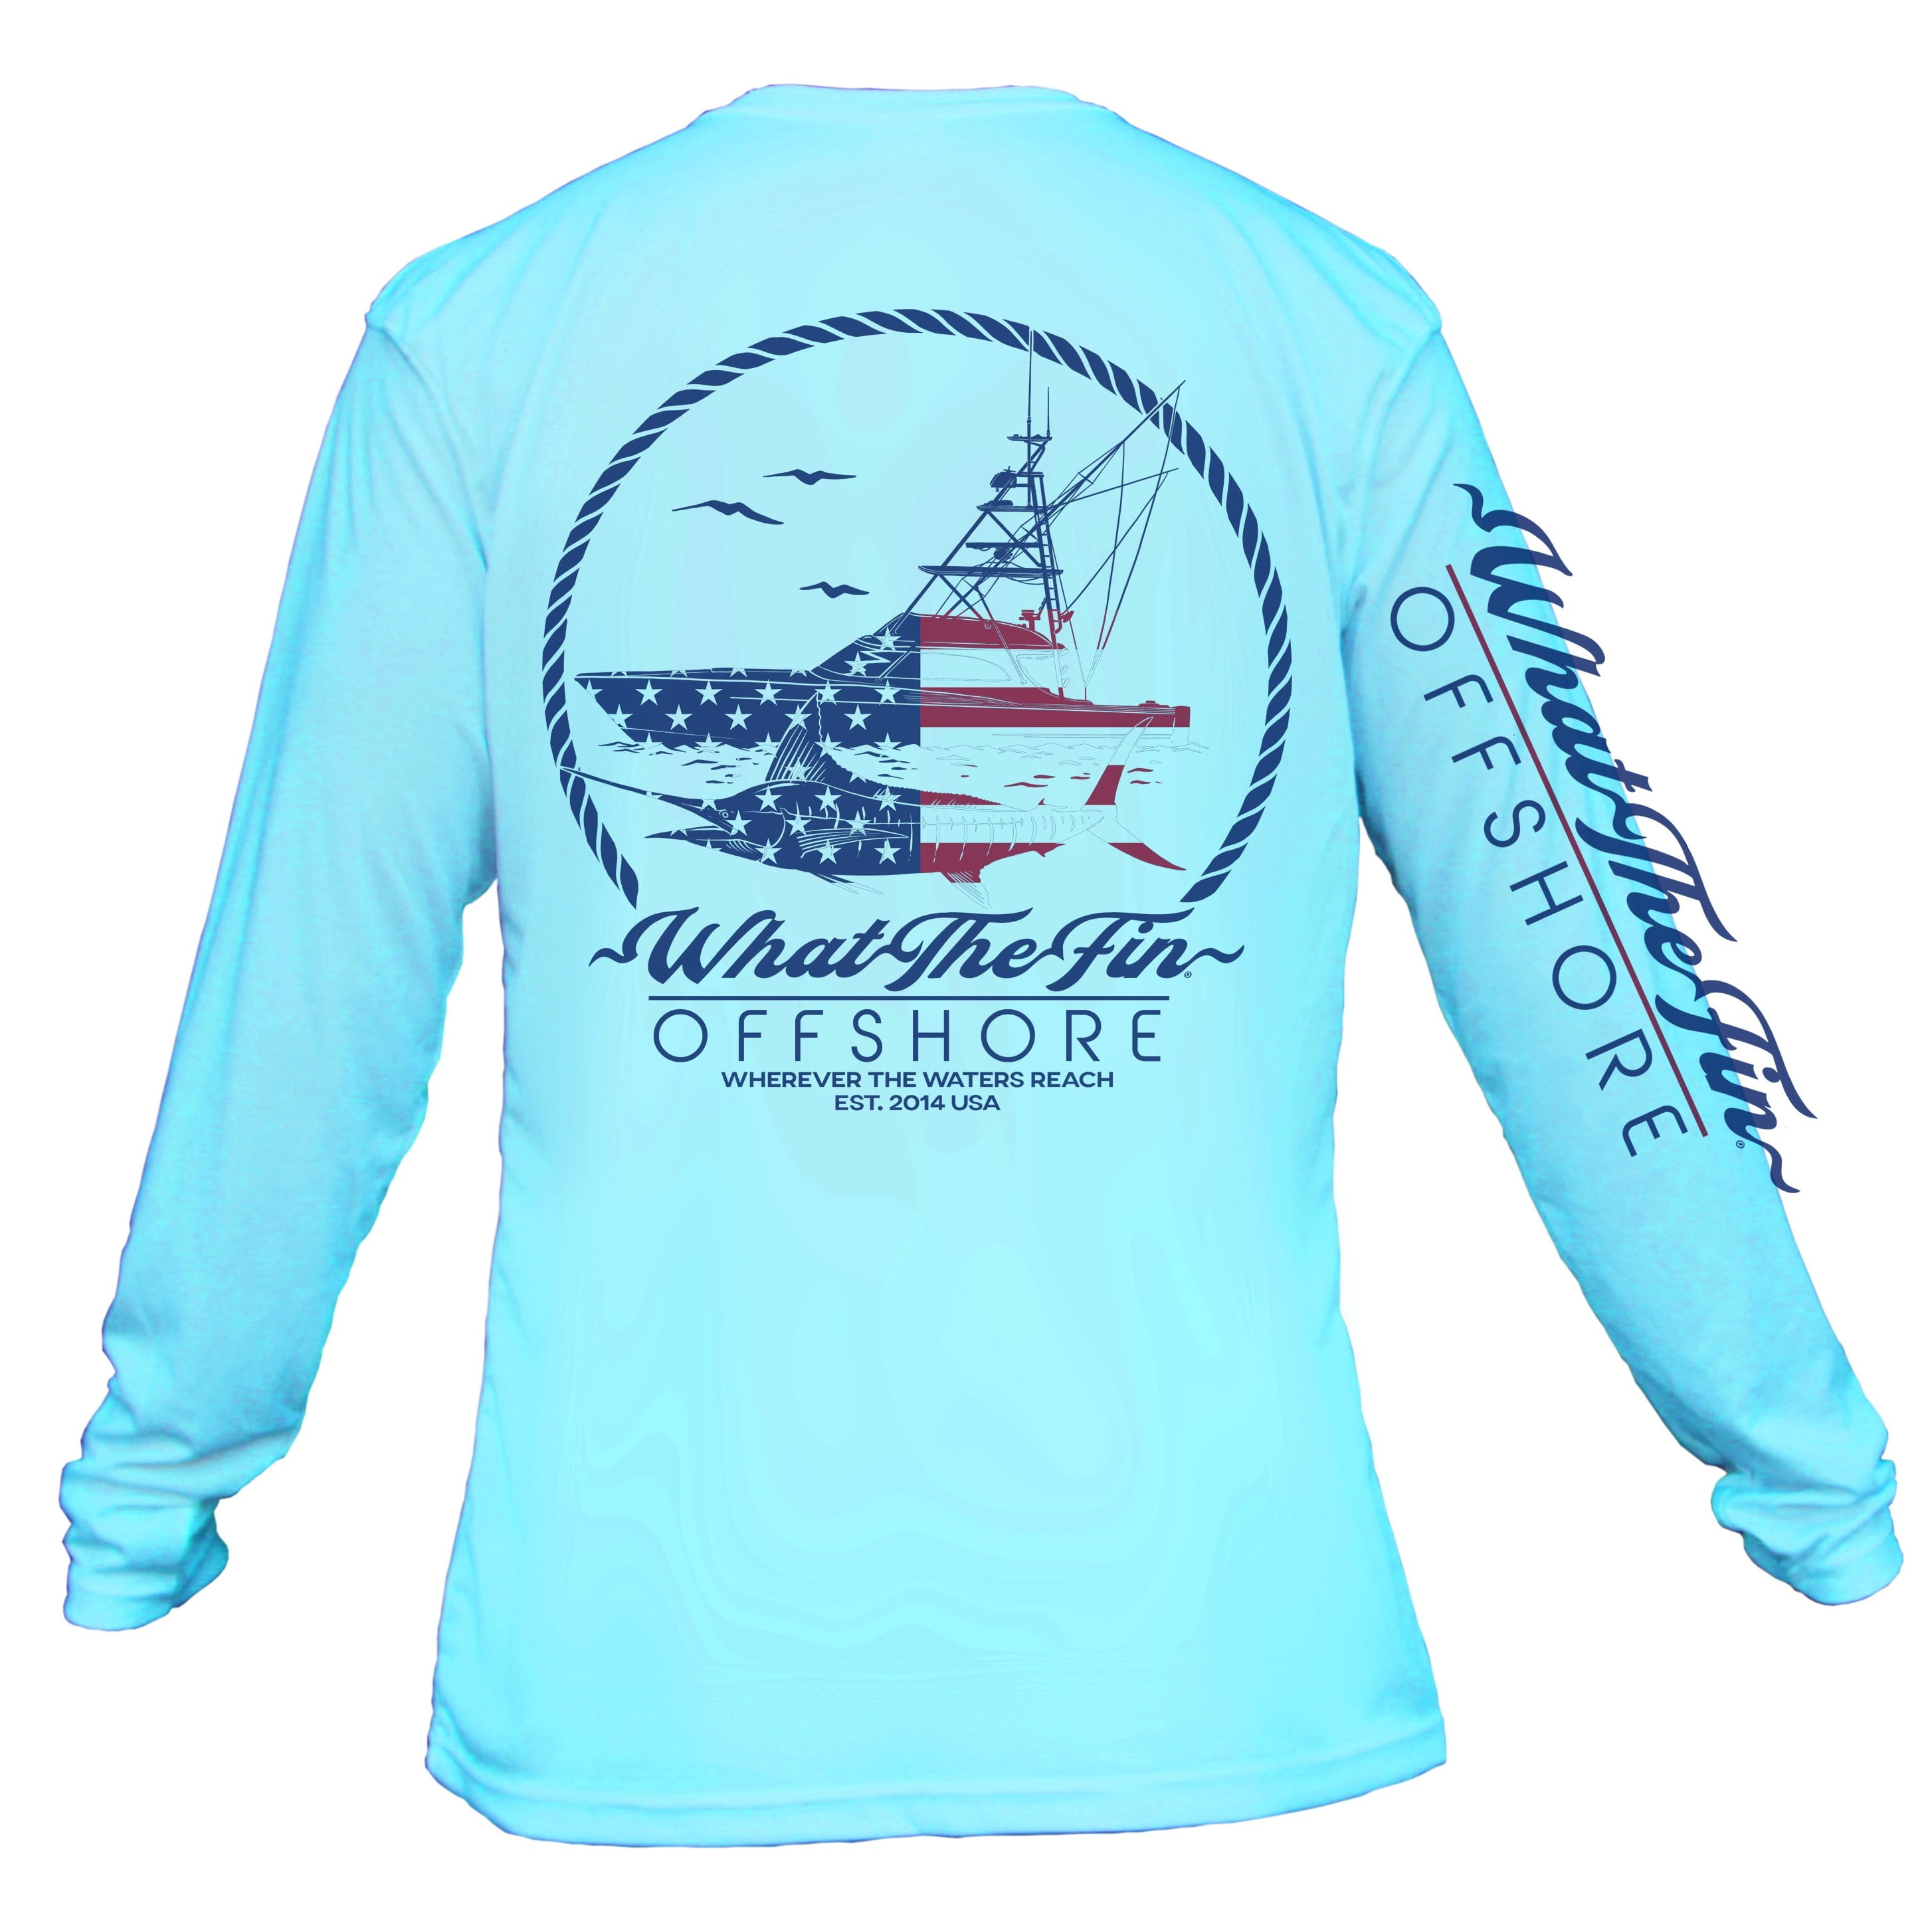 WTF - What The Fin? Long-Sleeve Performance Wicking Shirt - Offshore USA